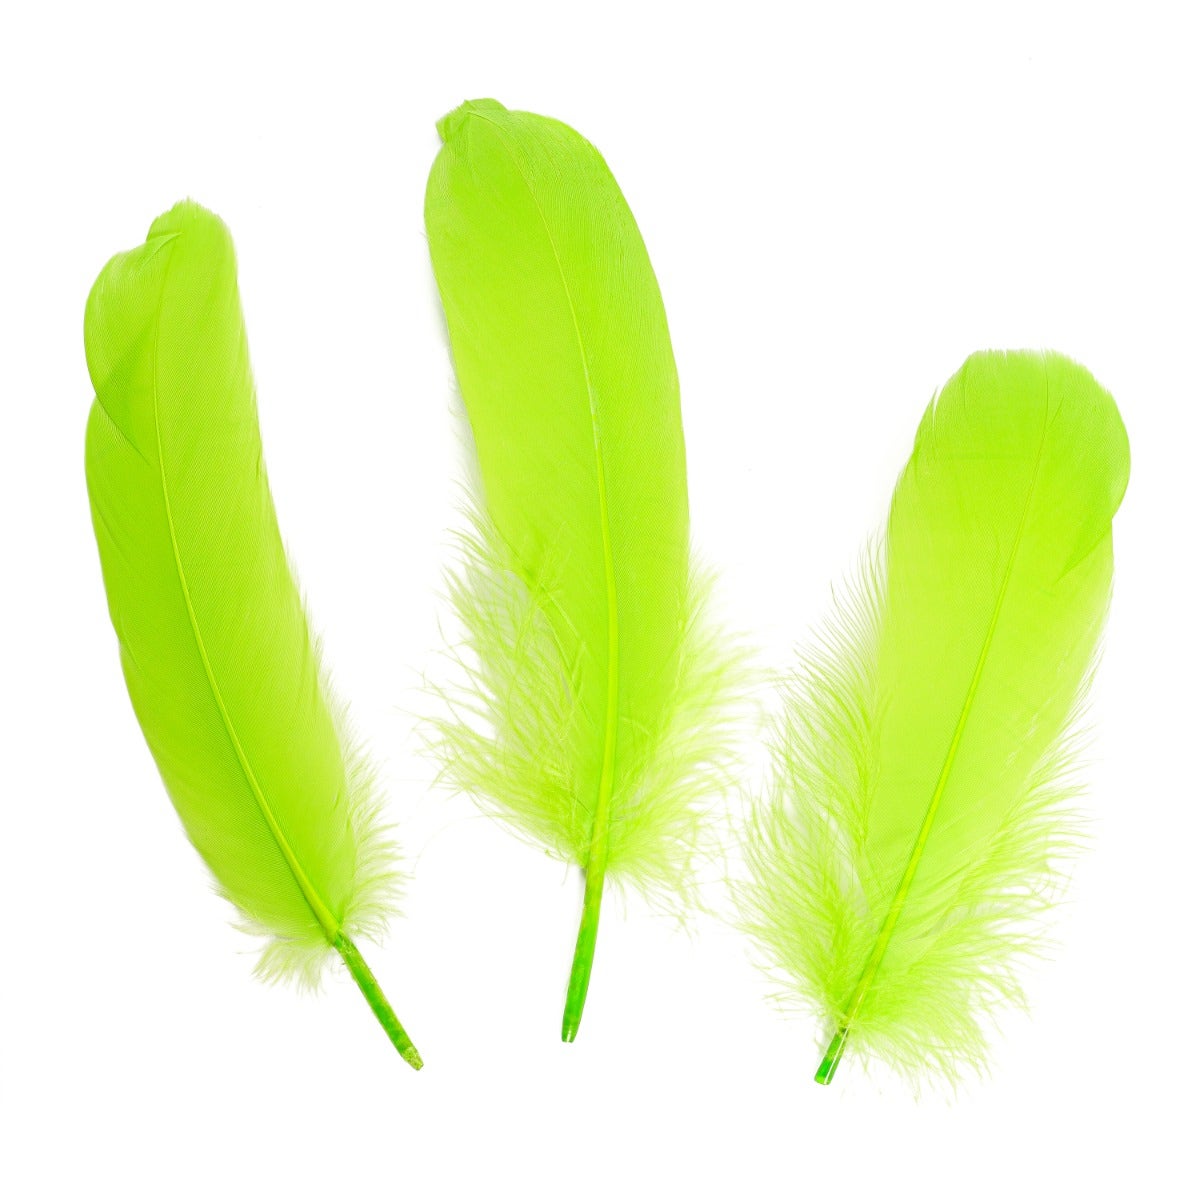 Goose Pallet Feathers 6-8" - 12 pc - Lime